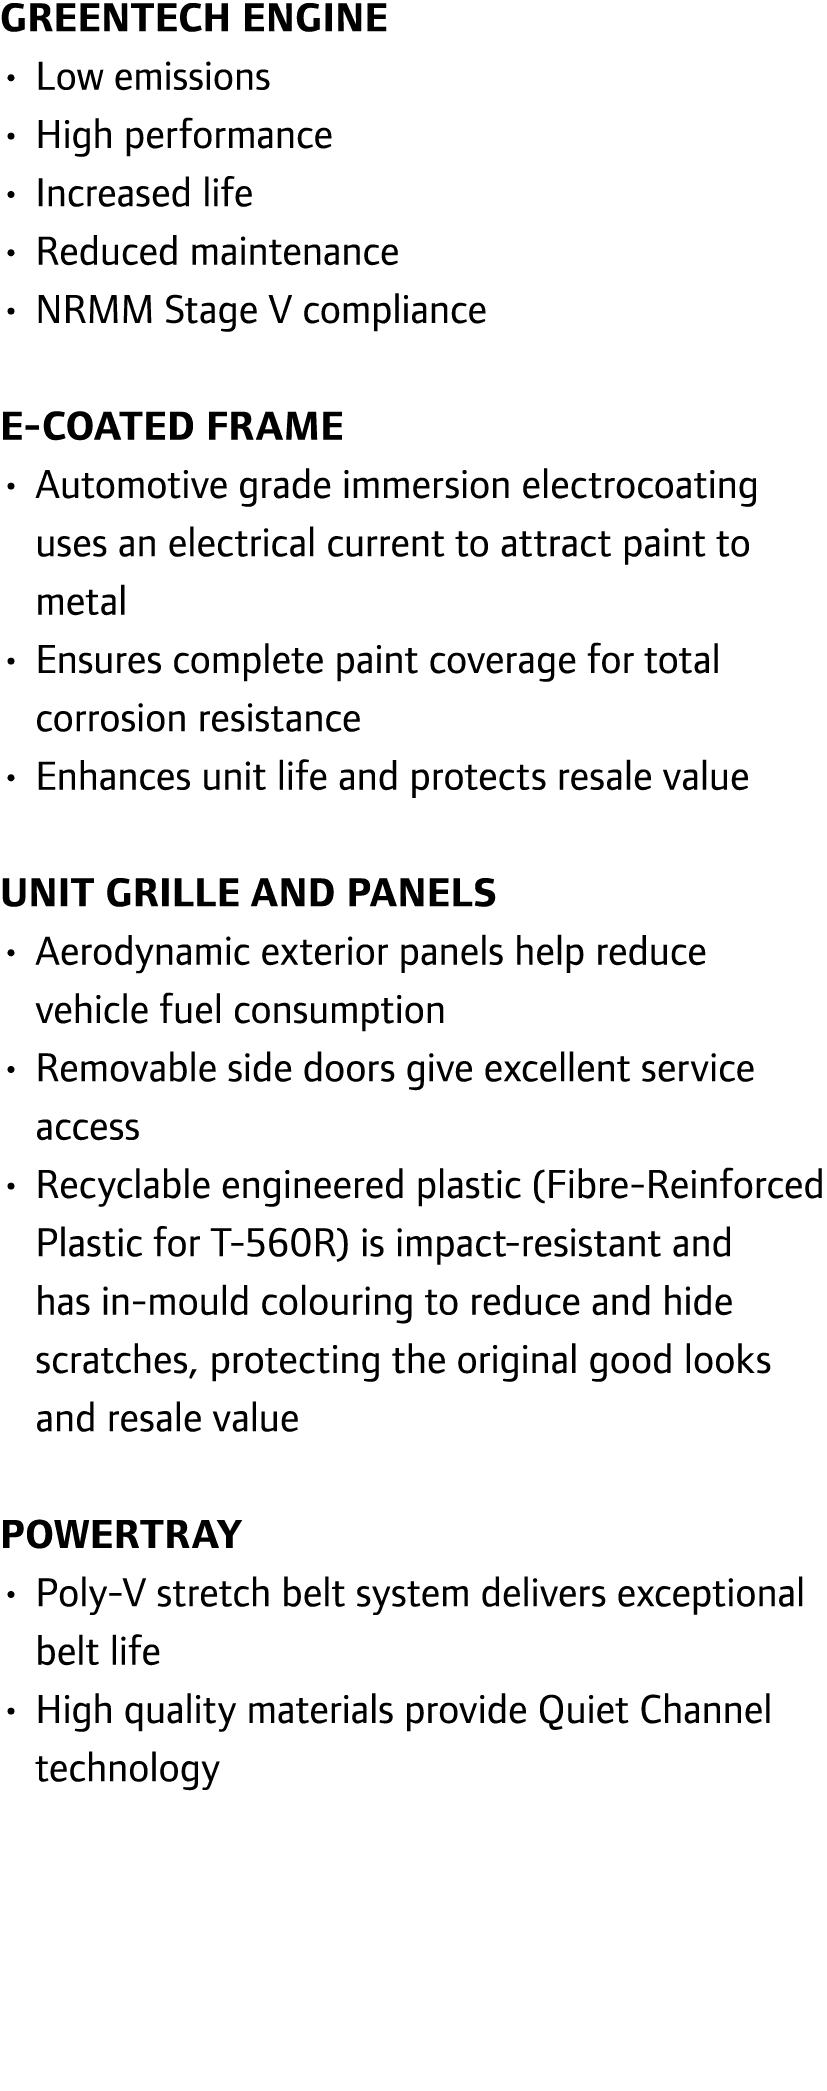 GreenTech Engine • Low emissions • High performance • Increased life • Reduced maintenance • NRMM Stage V compliance ...